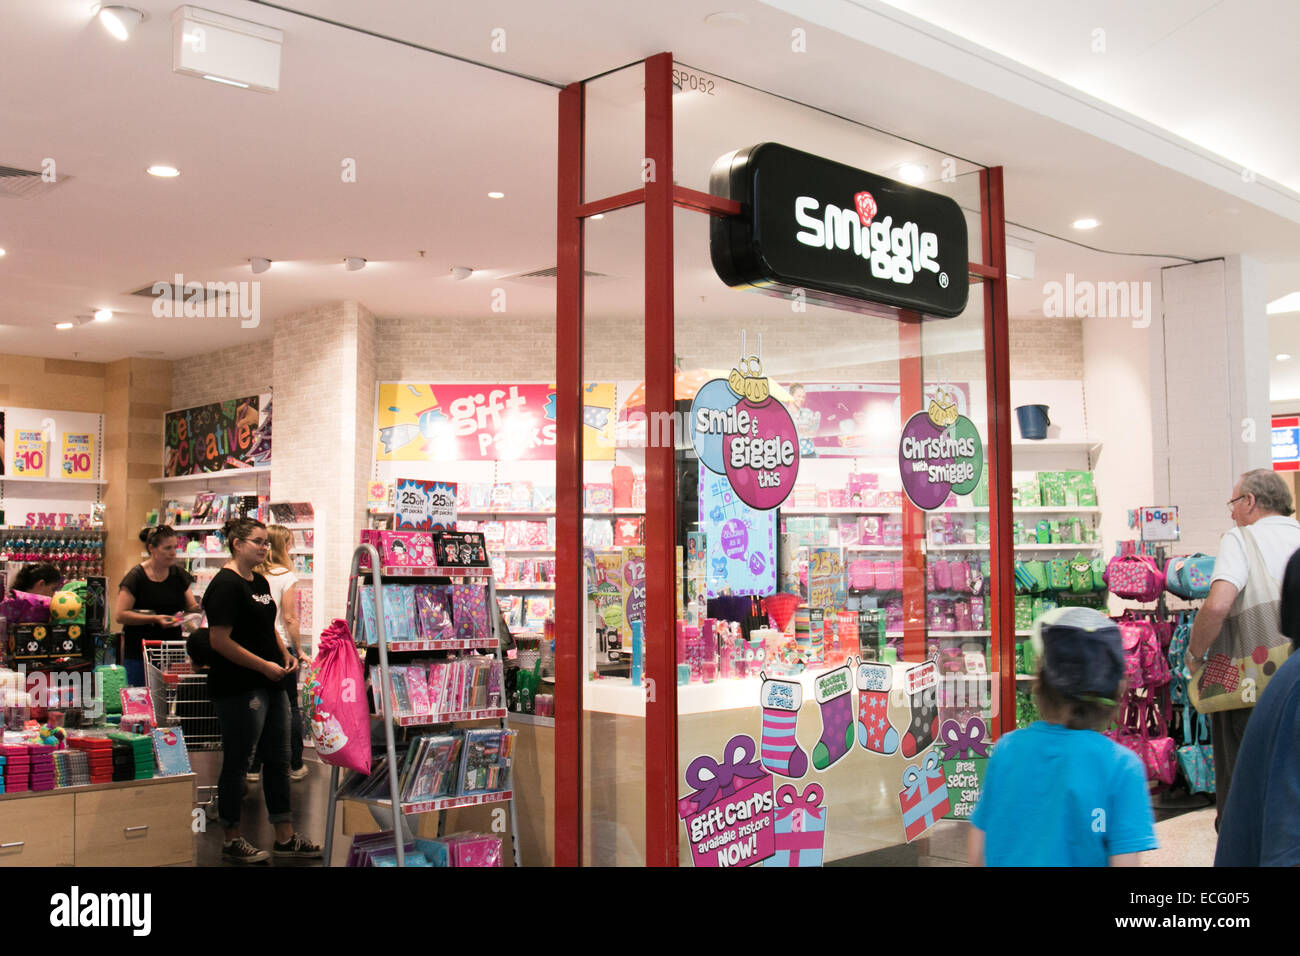 Smiggle, Stationary Stores at White Rose Shopping Centre